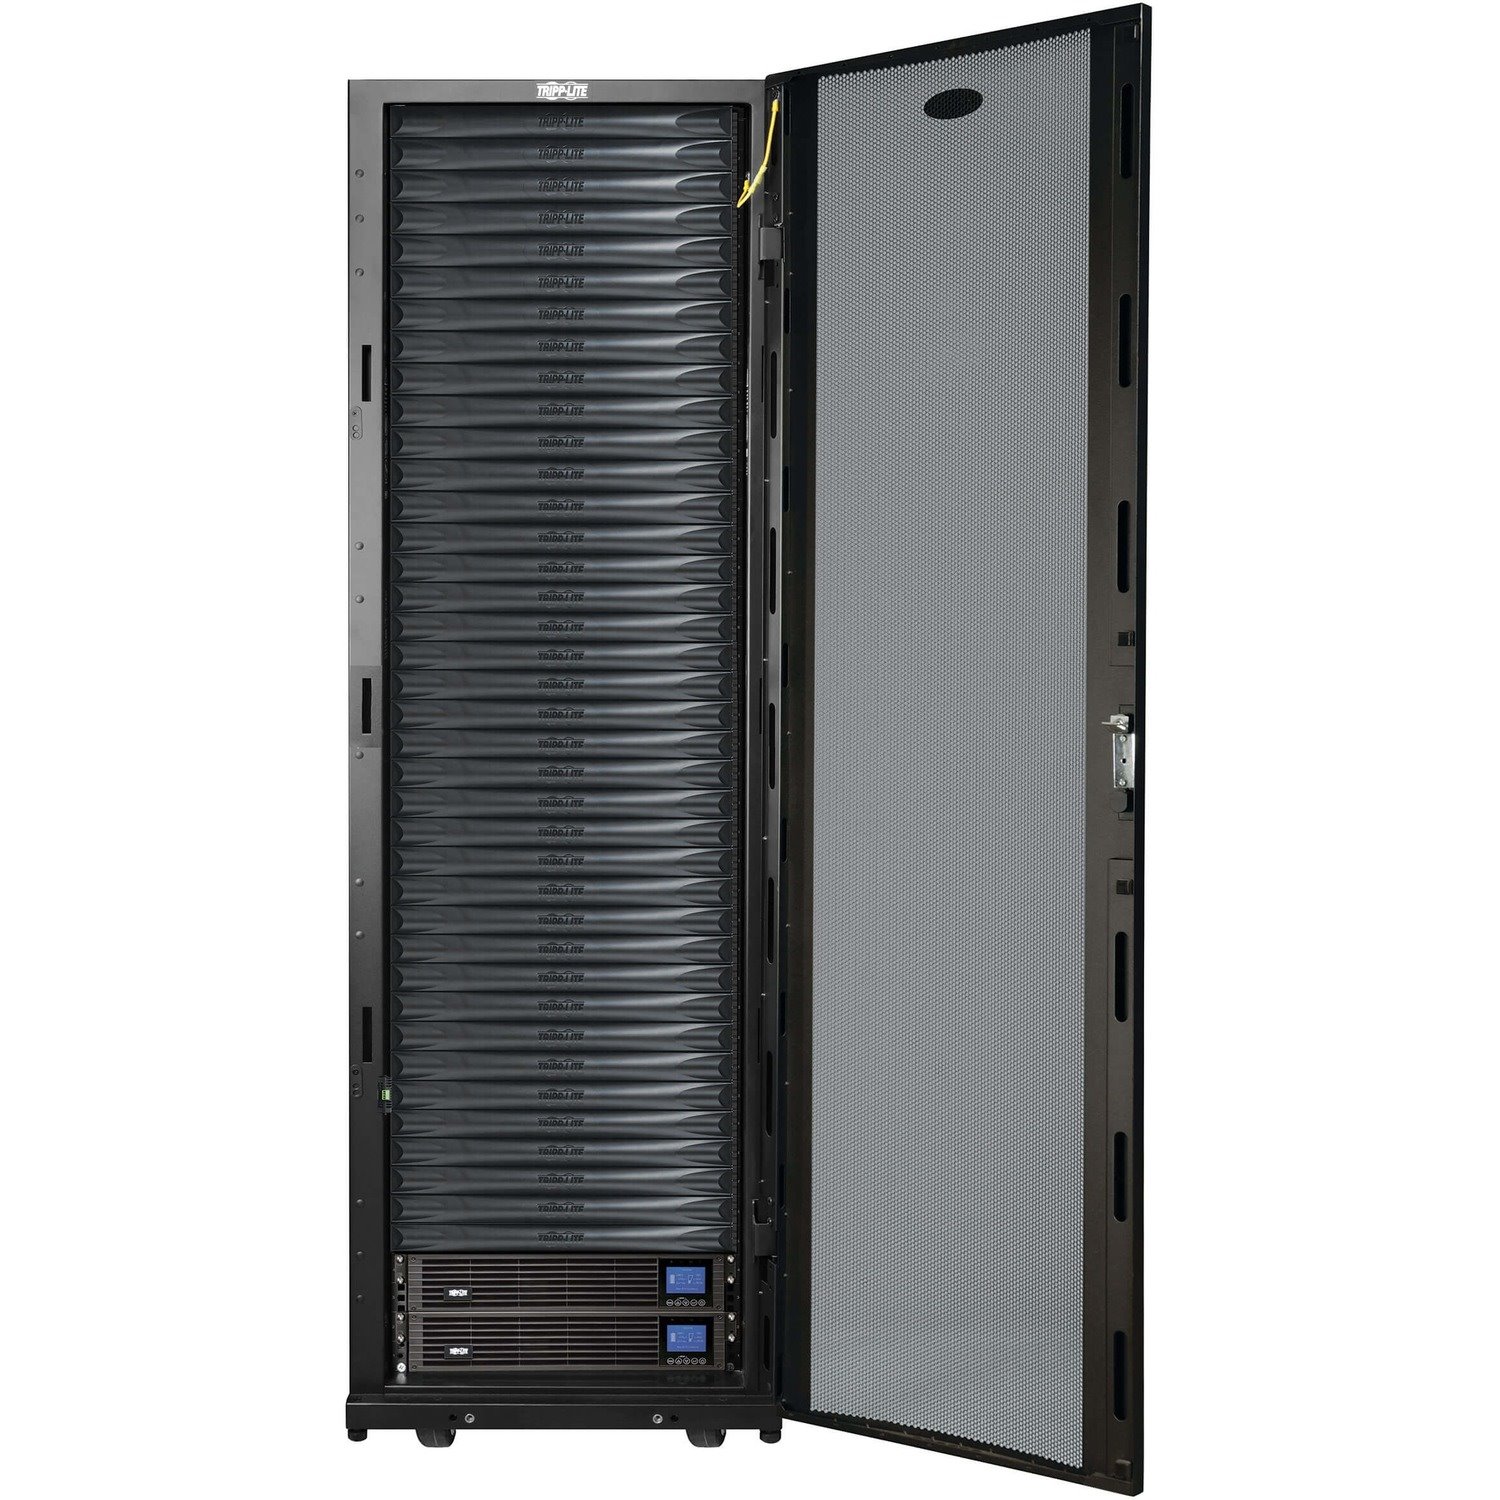 Tripp Lite by Eaton EdgeReady&trade; Micro Data Center - 38U, (2) 3 kVA UPS Systems (N+N), Network Management and Dual PDUs, 230V Assembled/Tested Unit